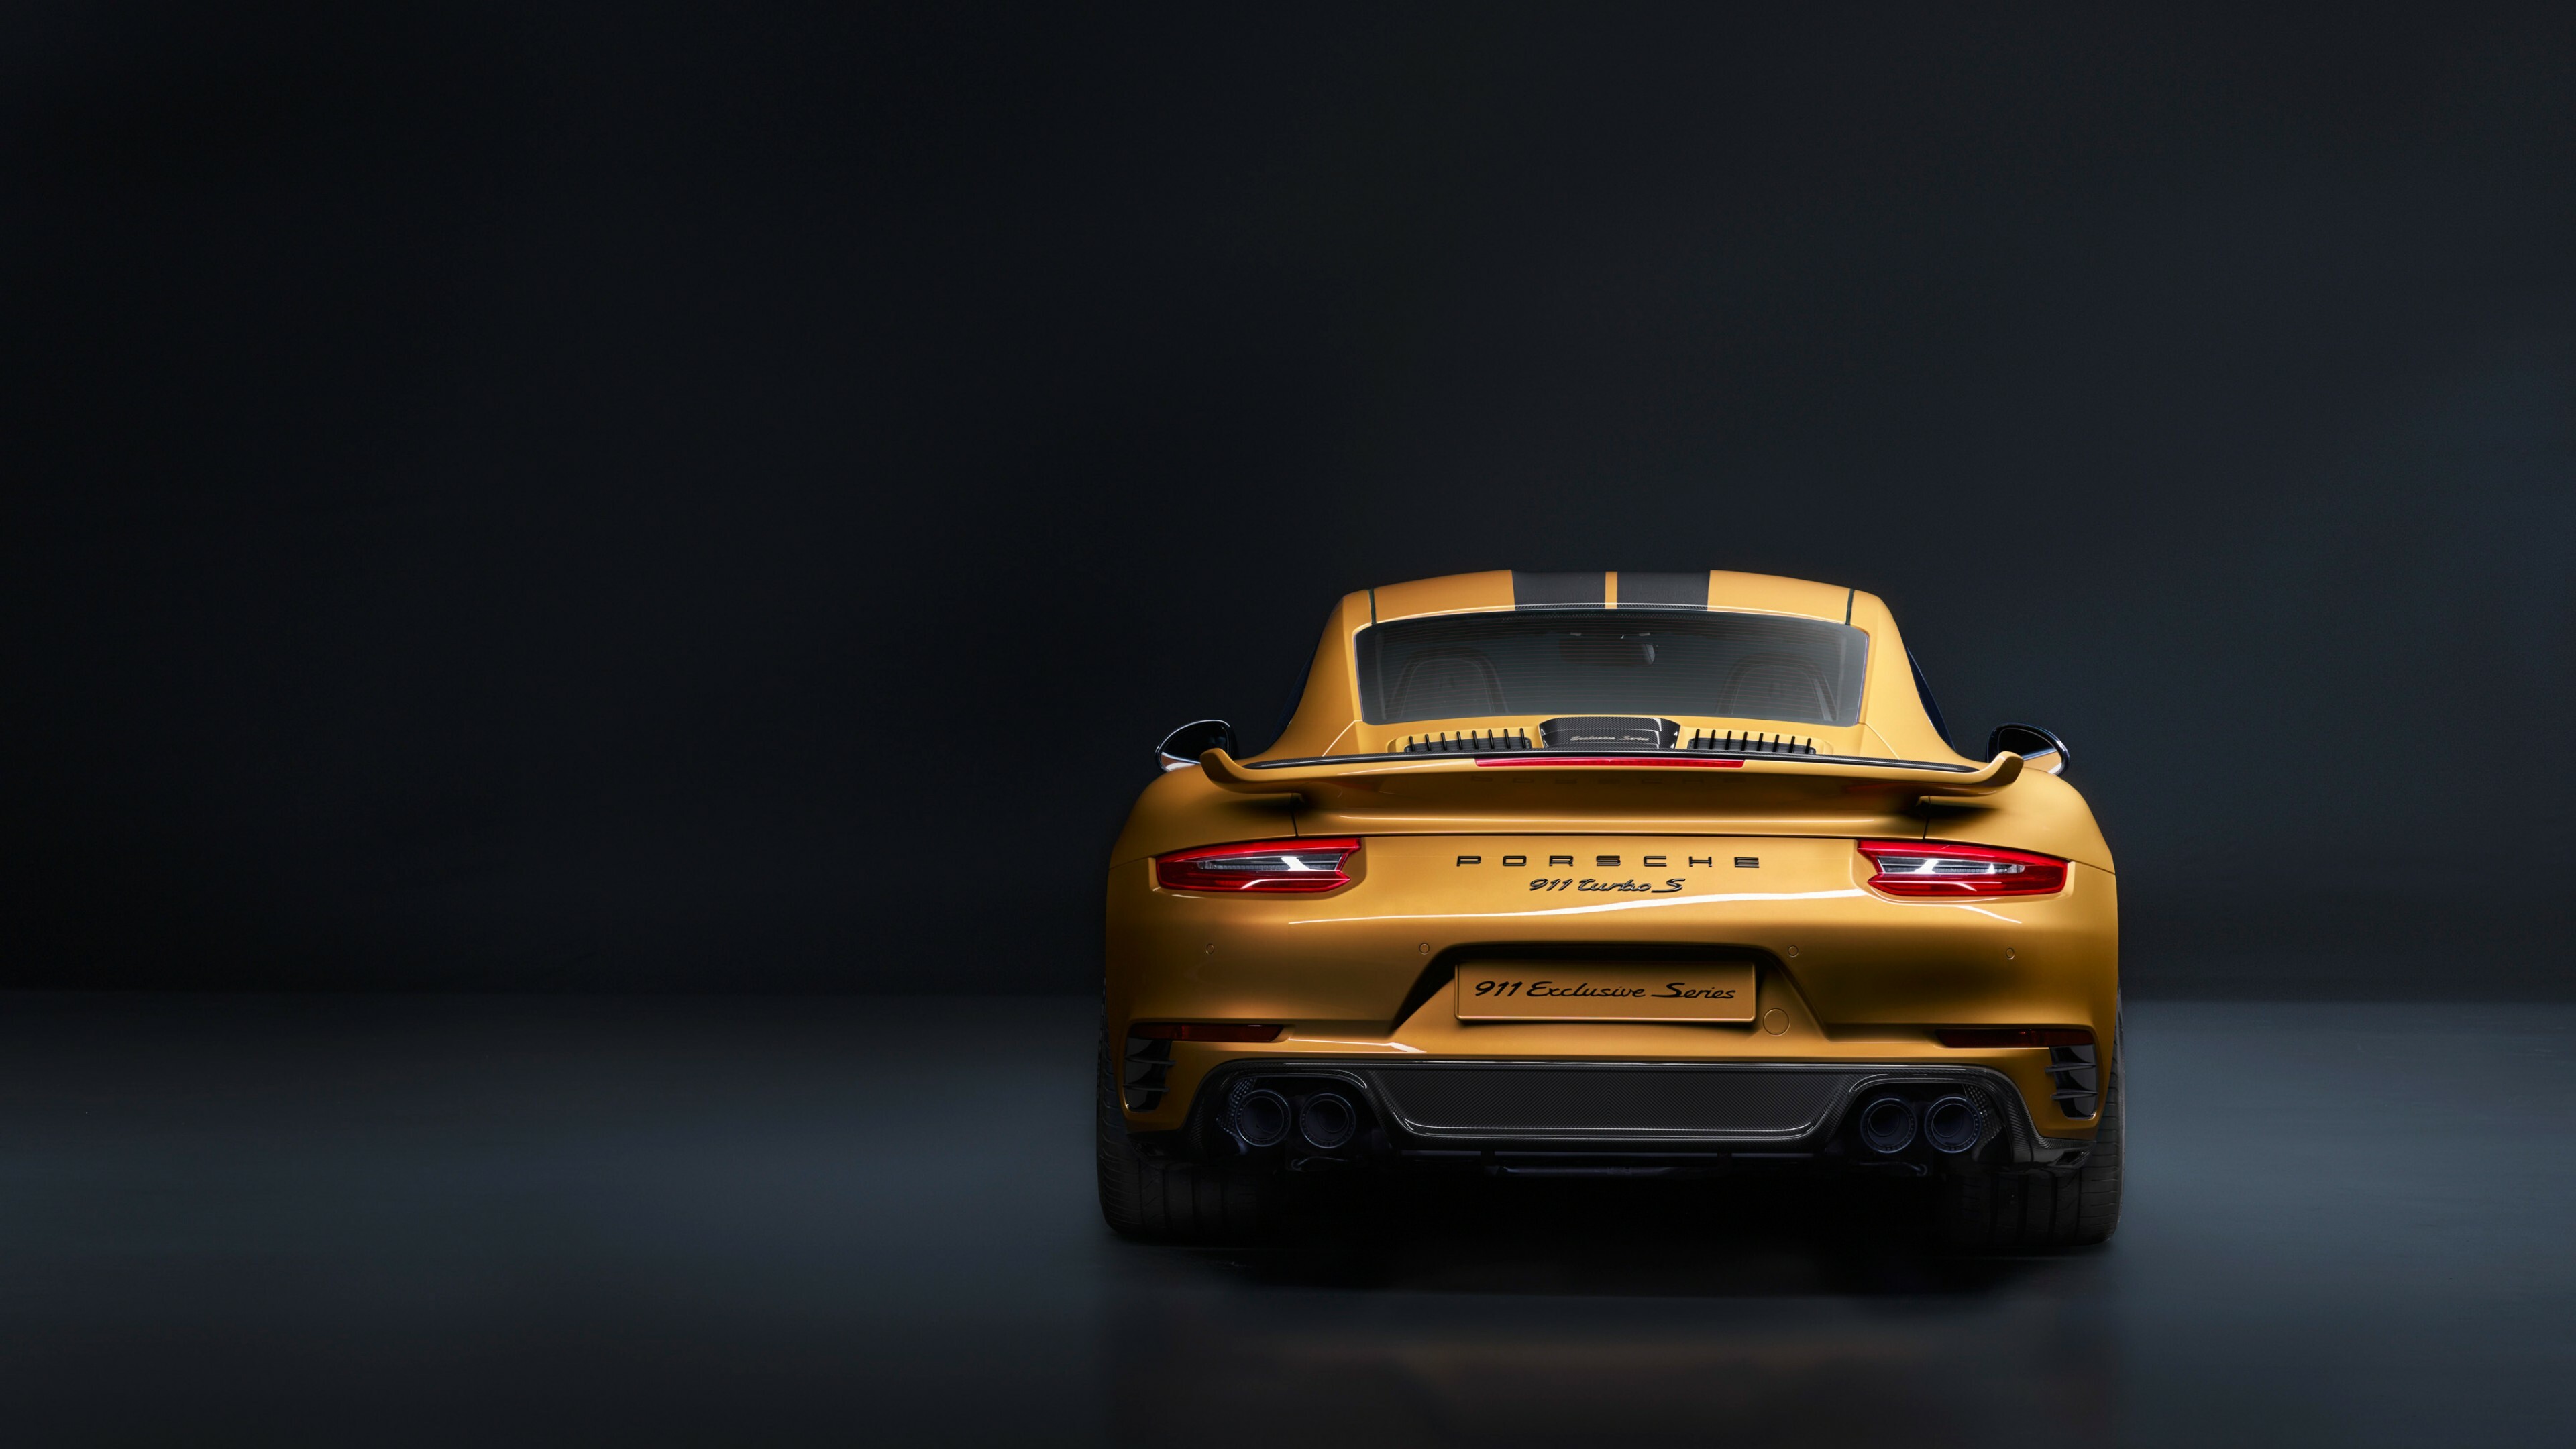 Porsche: 911, Turbo S, Exclusive Series, The most powerful and unique 911 Turbo S ever. 3840x2160 4K Background.